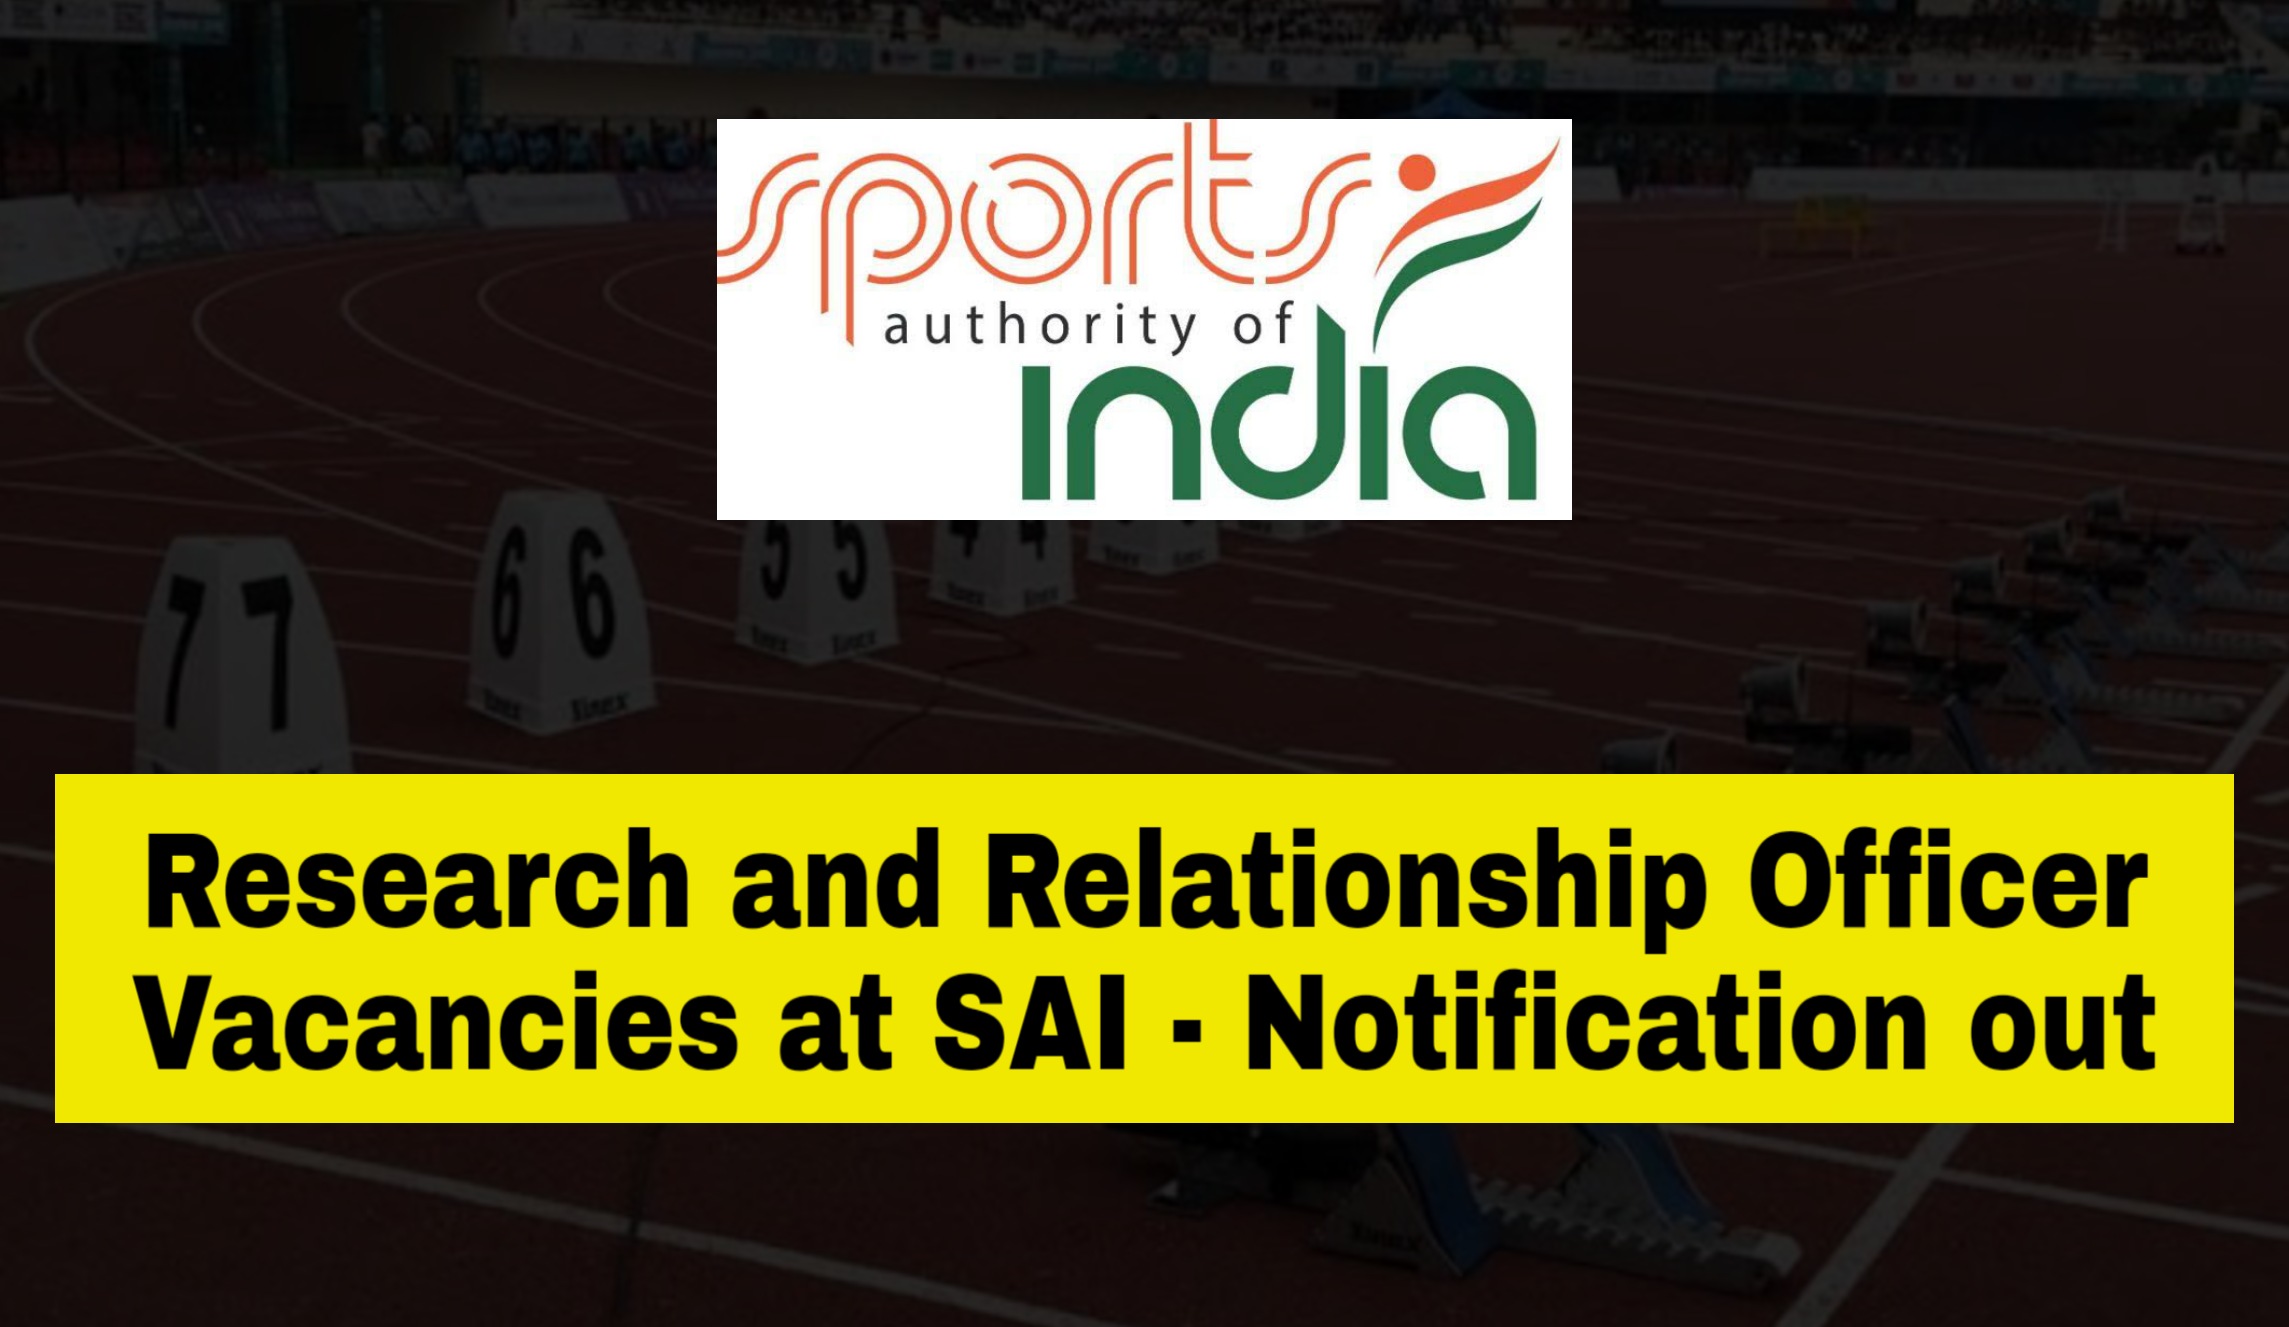 SAI Recruitment 2020 - Research and Relationship Officer Vacancies